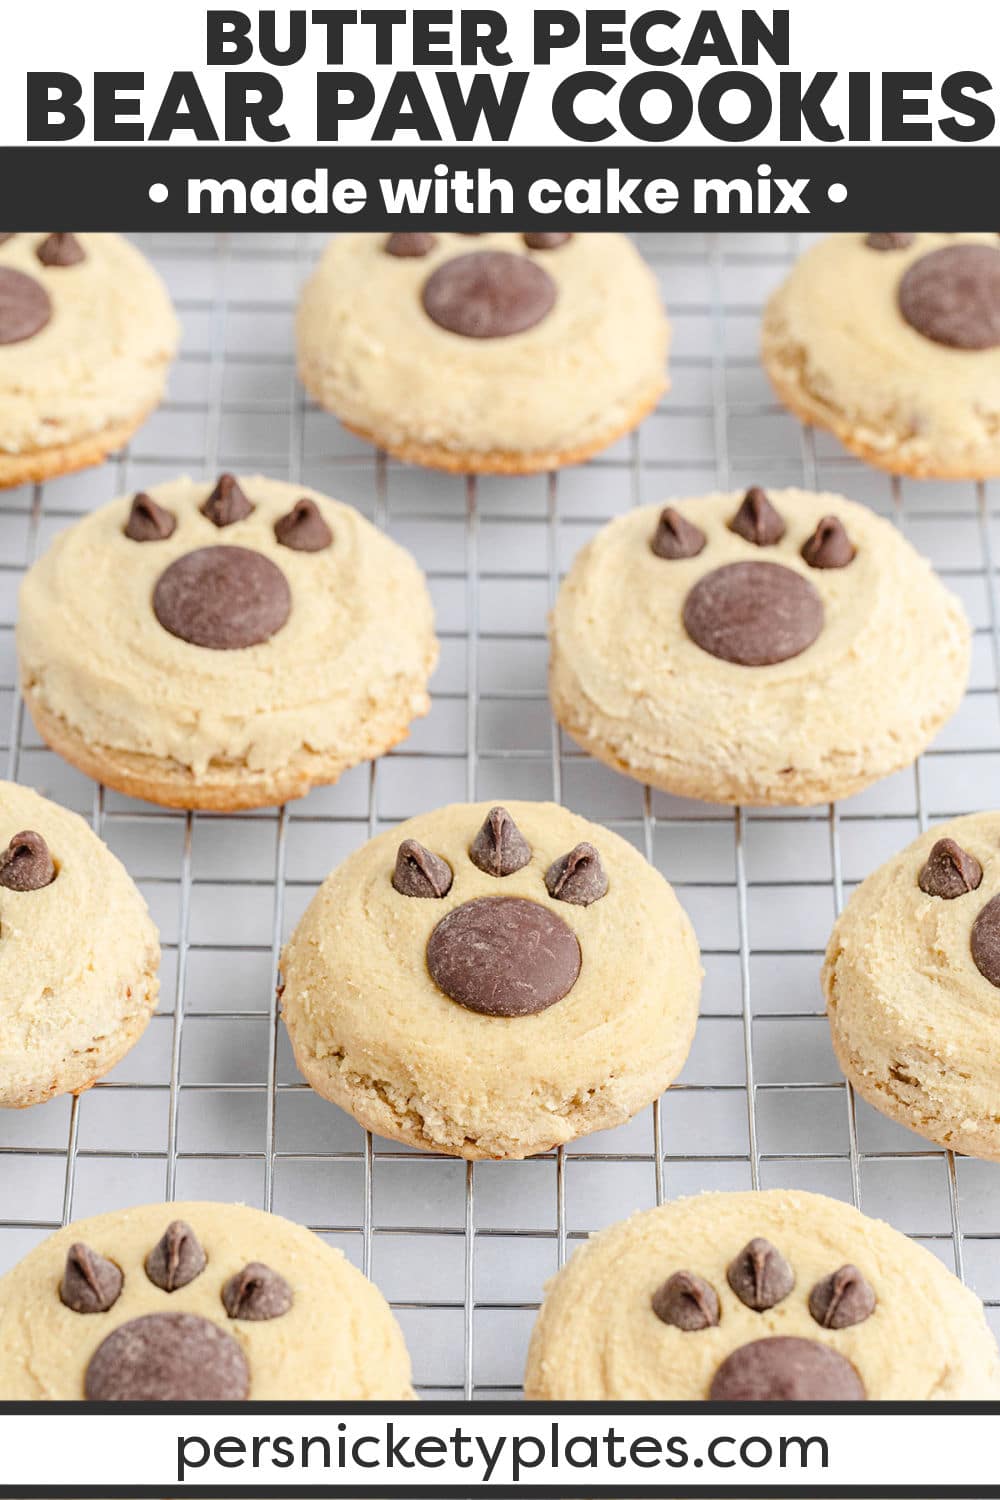 Bear paw cookies are made with a butter pecan cake mix and chopped pecans for added texture. These soft and chewy cookies are topped with a sweet maple frosting and adorned with chocolate candy melts and chocolate chips for the paw print! | www.persnicketyplates.com